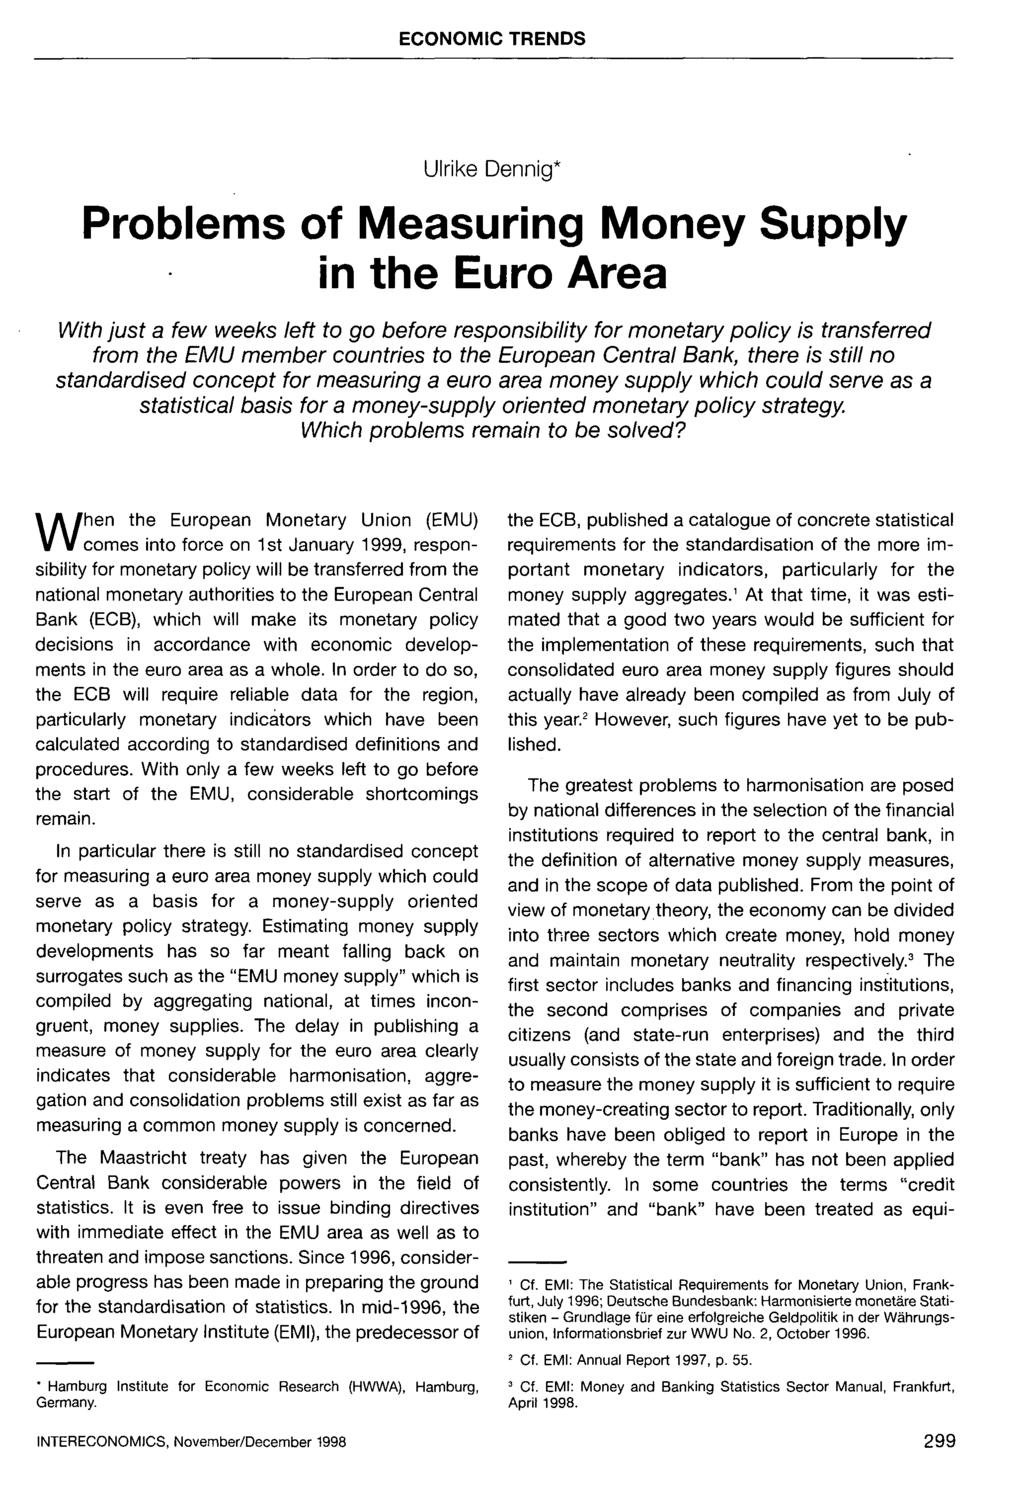 Ulrike Dennig* Problems of Measuring Money Supply in the Euro Area With just a few weeks left to go before responsibility for monetary policy is transferred from the EMU member countries to the